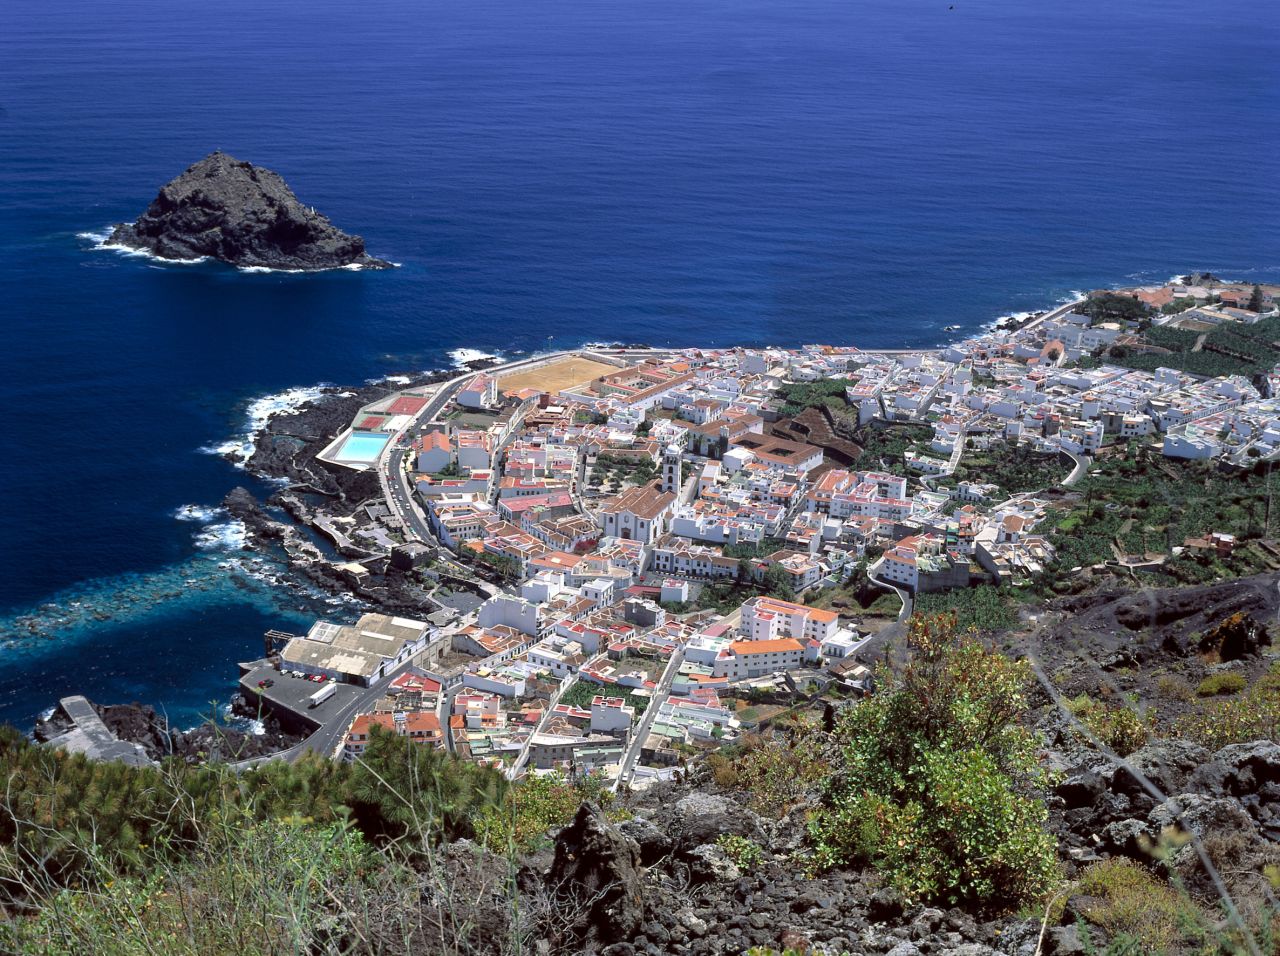 On the southern side of the island, the coastal village of Garachico is home to natural lava rock pools.<br />